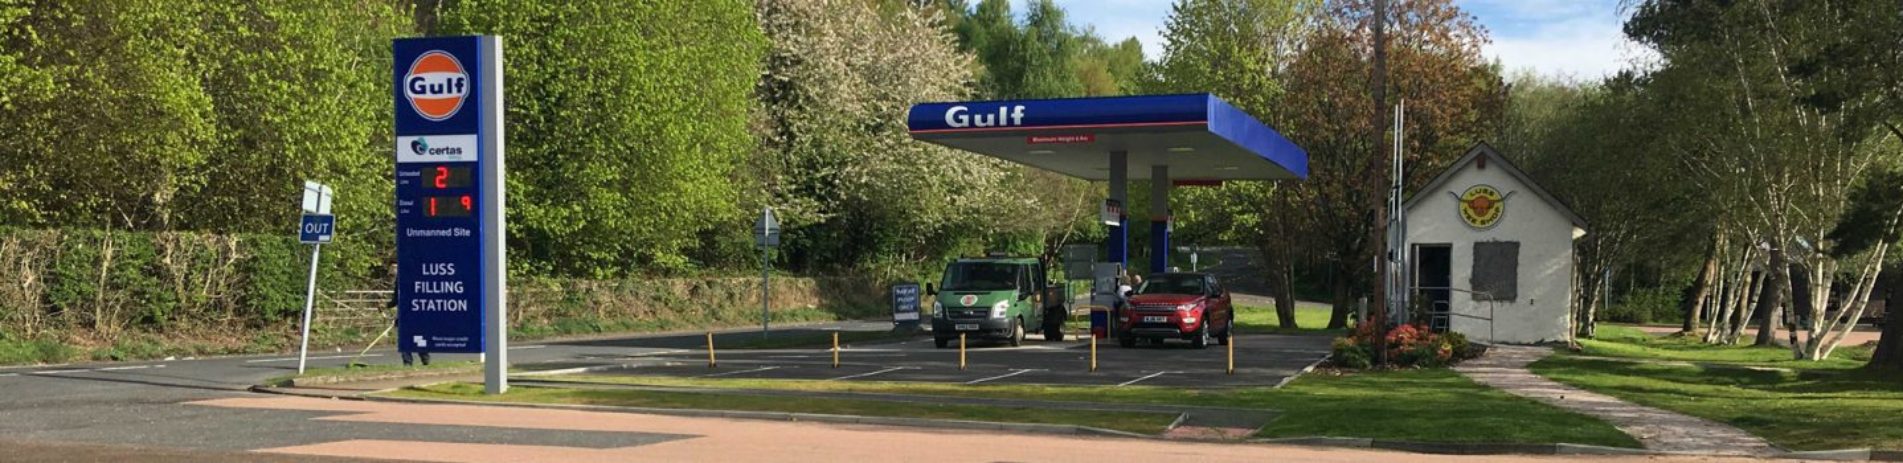 gulf-filling-station-in-luss-village-two-cars-stationed